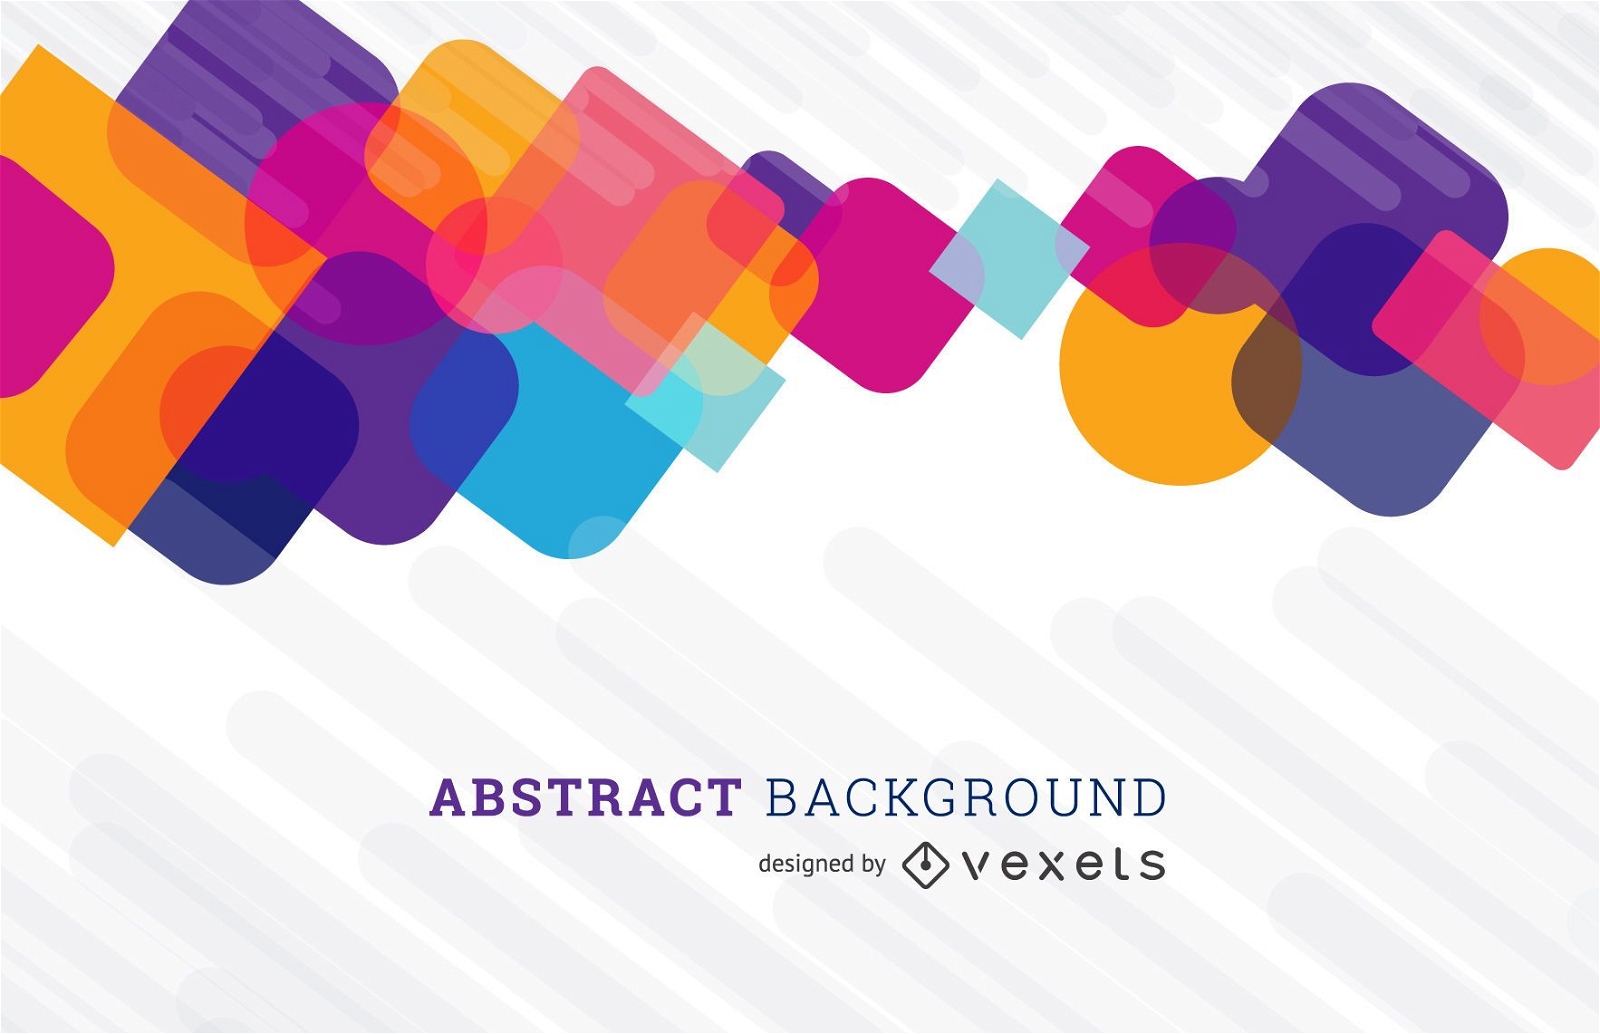 Abstract background with colorful shapes design